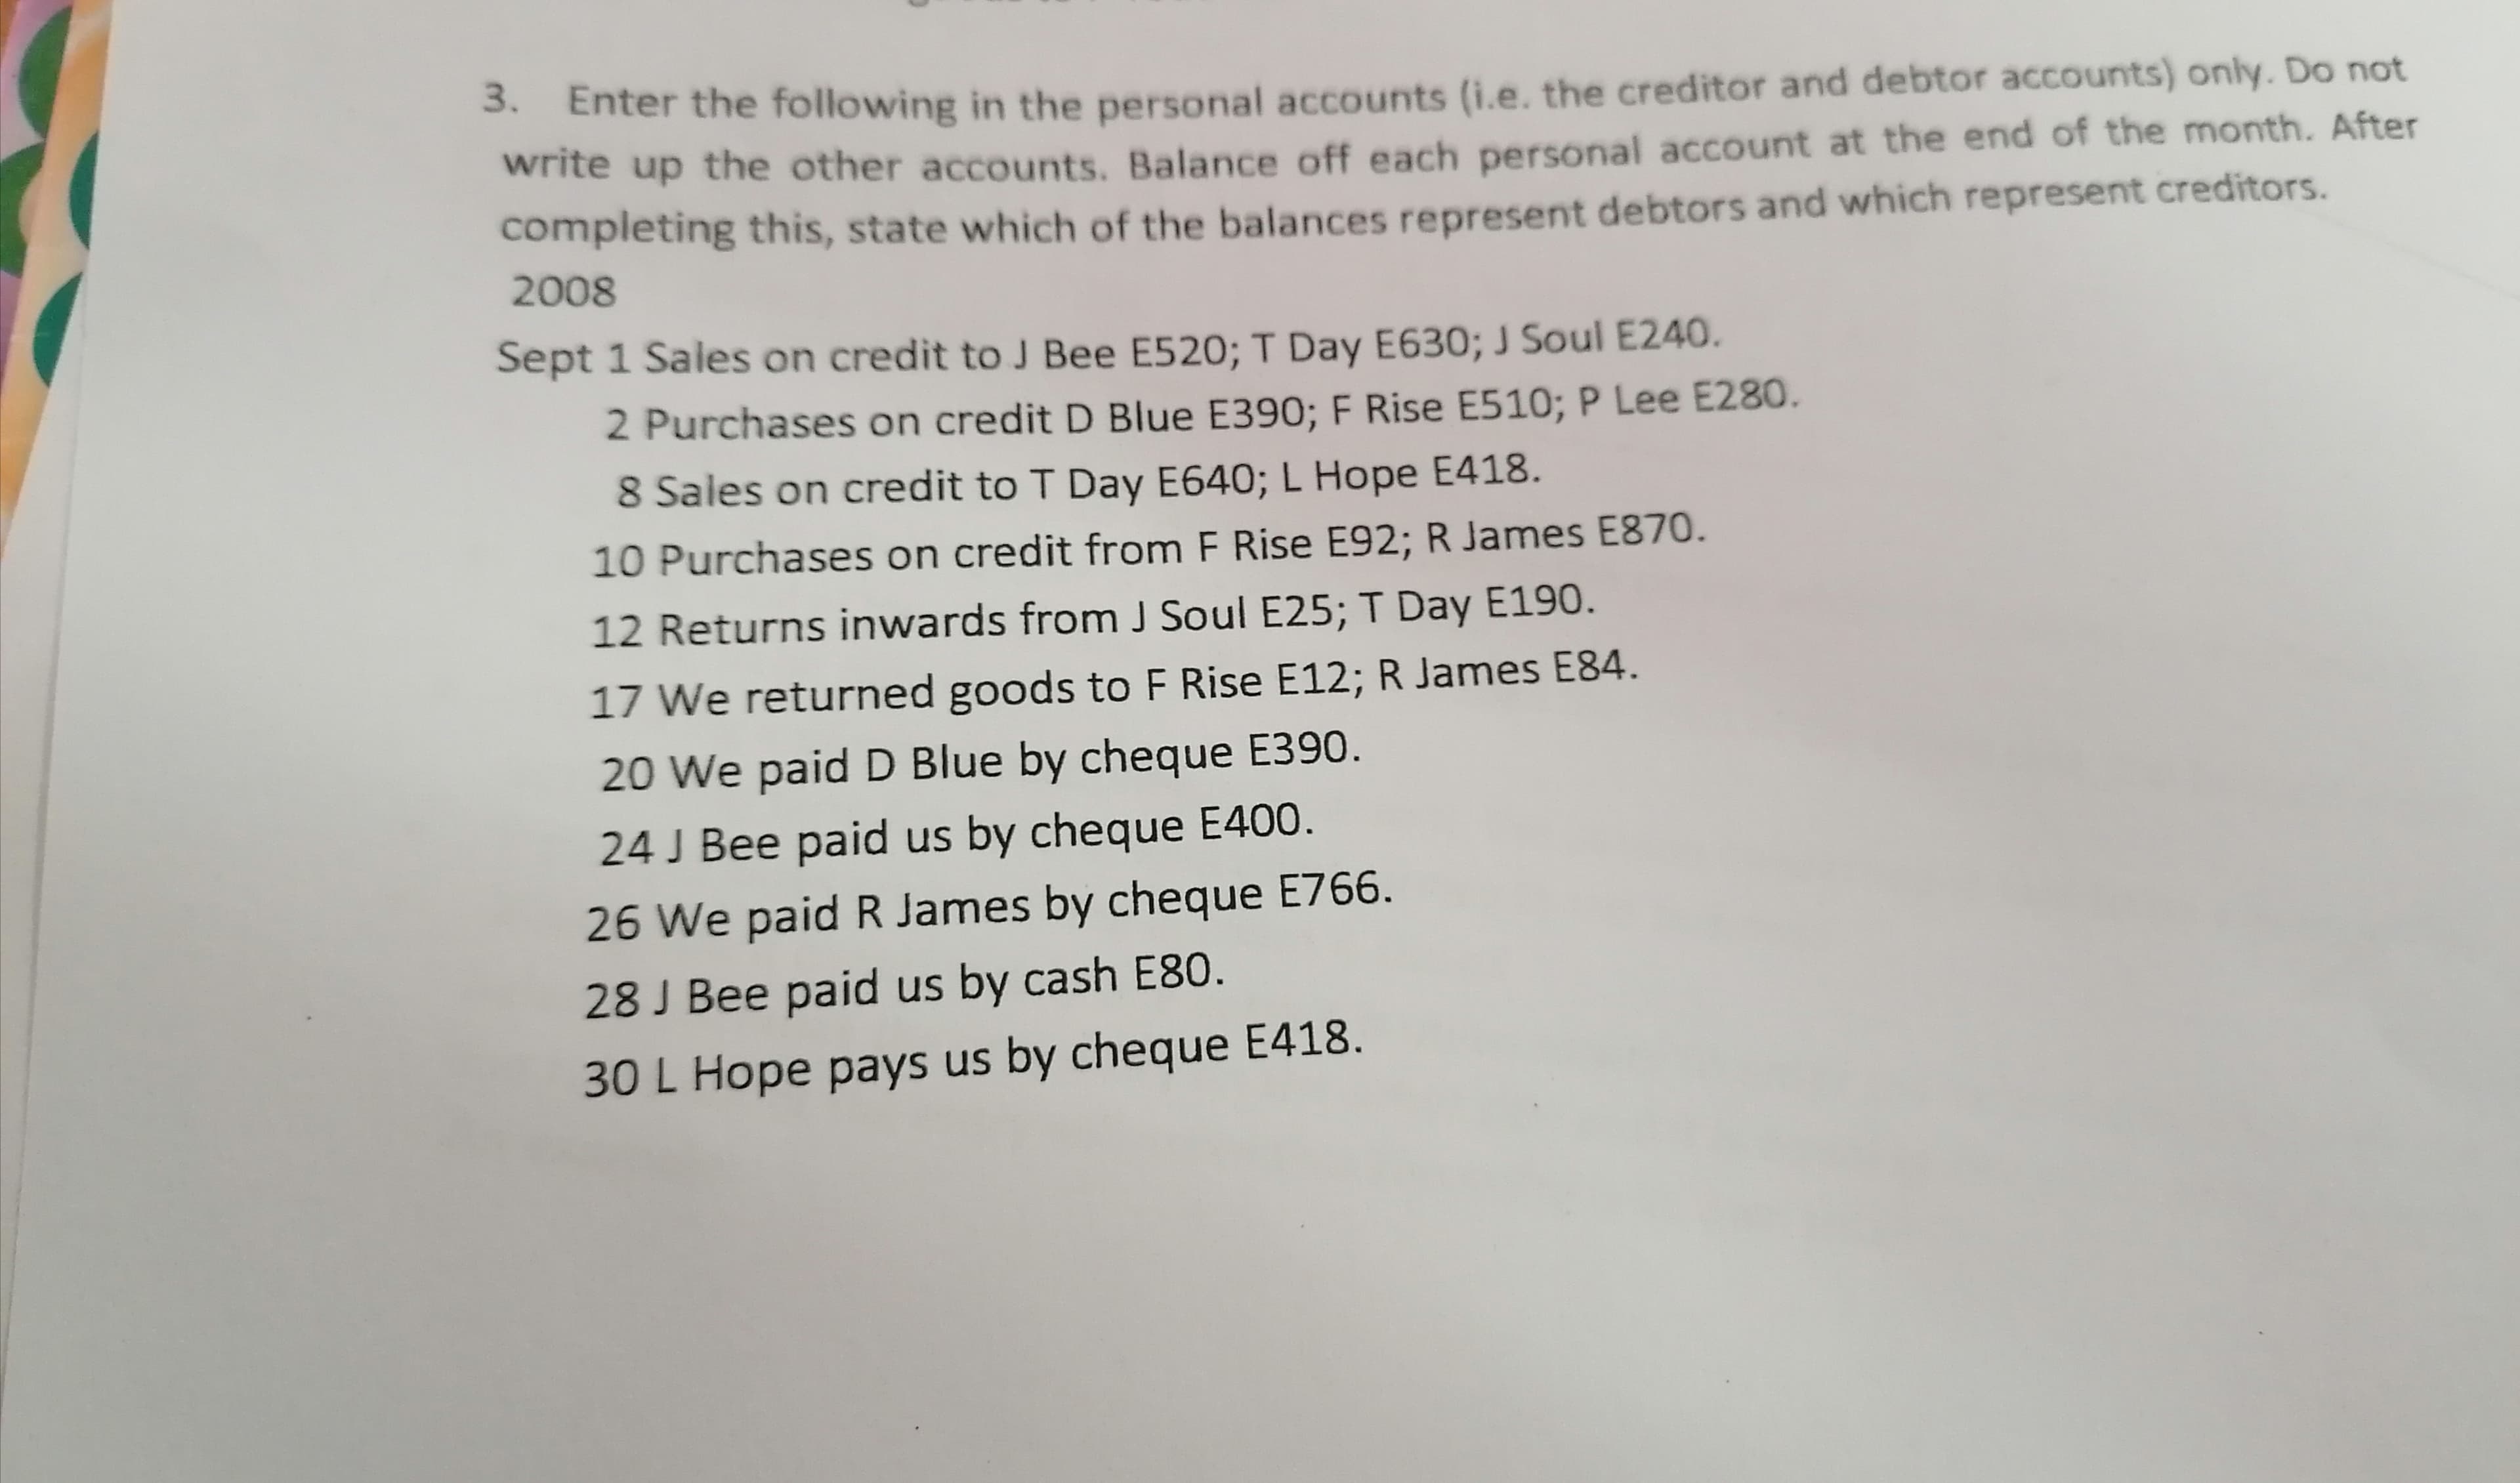 3. Enter the following in the personal accounts (i.e. the creditor and debtor accounts) only. Do not
write up the other accounts. Balance off each personal account at the end of the month. After
completing this, state which of the balances represent debtors and which represent creditors.
2008
Sept 1 Sales on credit to J Bee E520; T Day E630; J Soul E240.
2 Purchases on credit D Blue E390; F Rise E510; P Lee E280.
8 Sales on credit to T Day E640; L Hope E418.
10 Purchases on credit from F Rise E92; R James E870.
12 Returns inwards from J Soul E25; T Day E190.
17 We returned goods to F Rise E12; R James E84.
20 We paid D Blue by cheque E390.
24 J Bee paid us by cheque E400.
26 We paid R James by cheque E766.
28 J Bee paid us by cash E80.
30 L Hope pays us by cheque E418.
